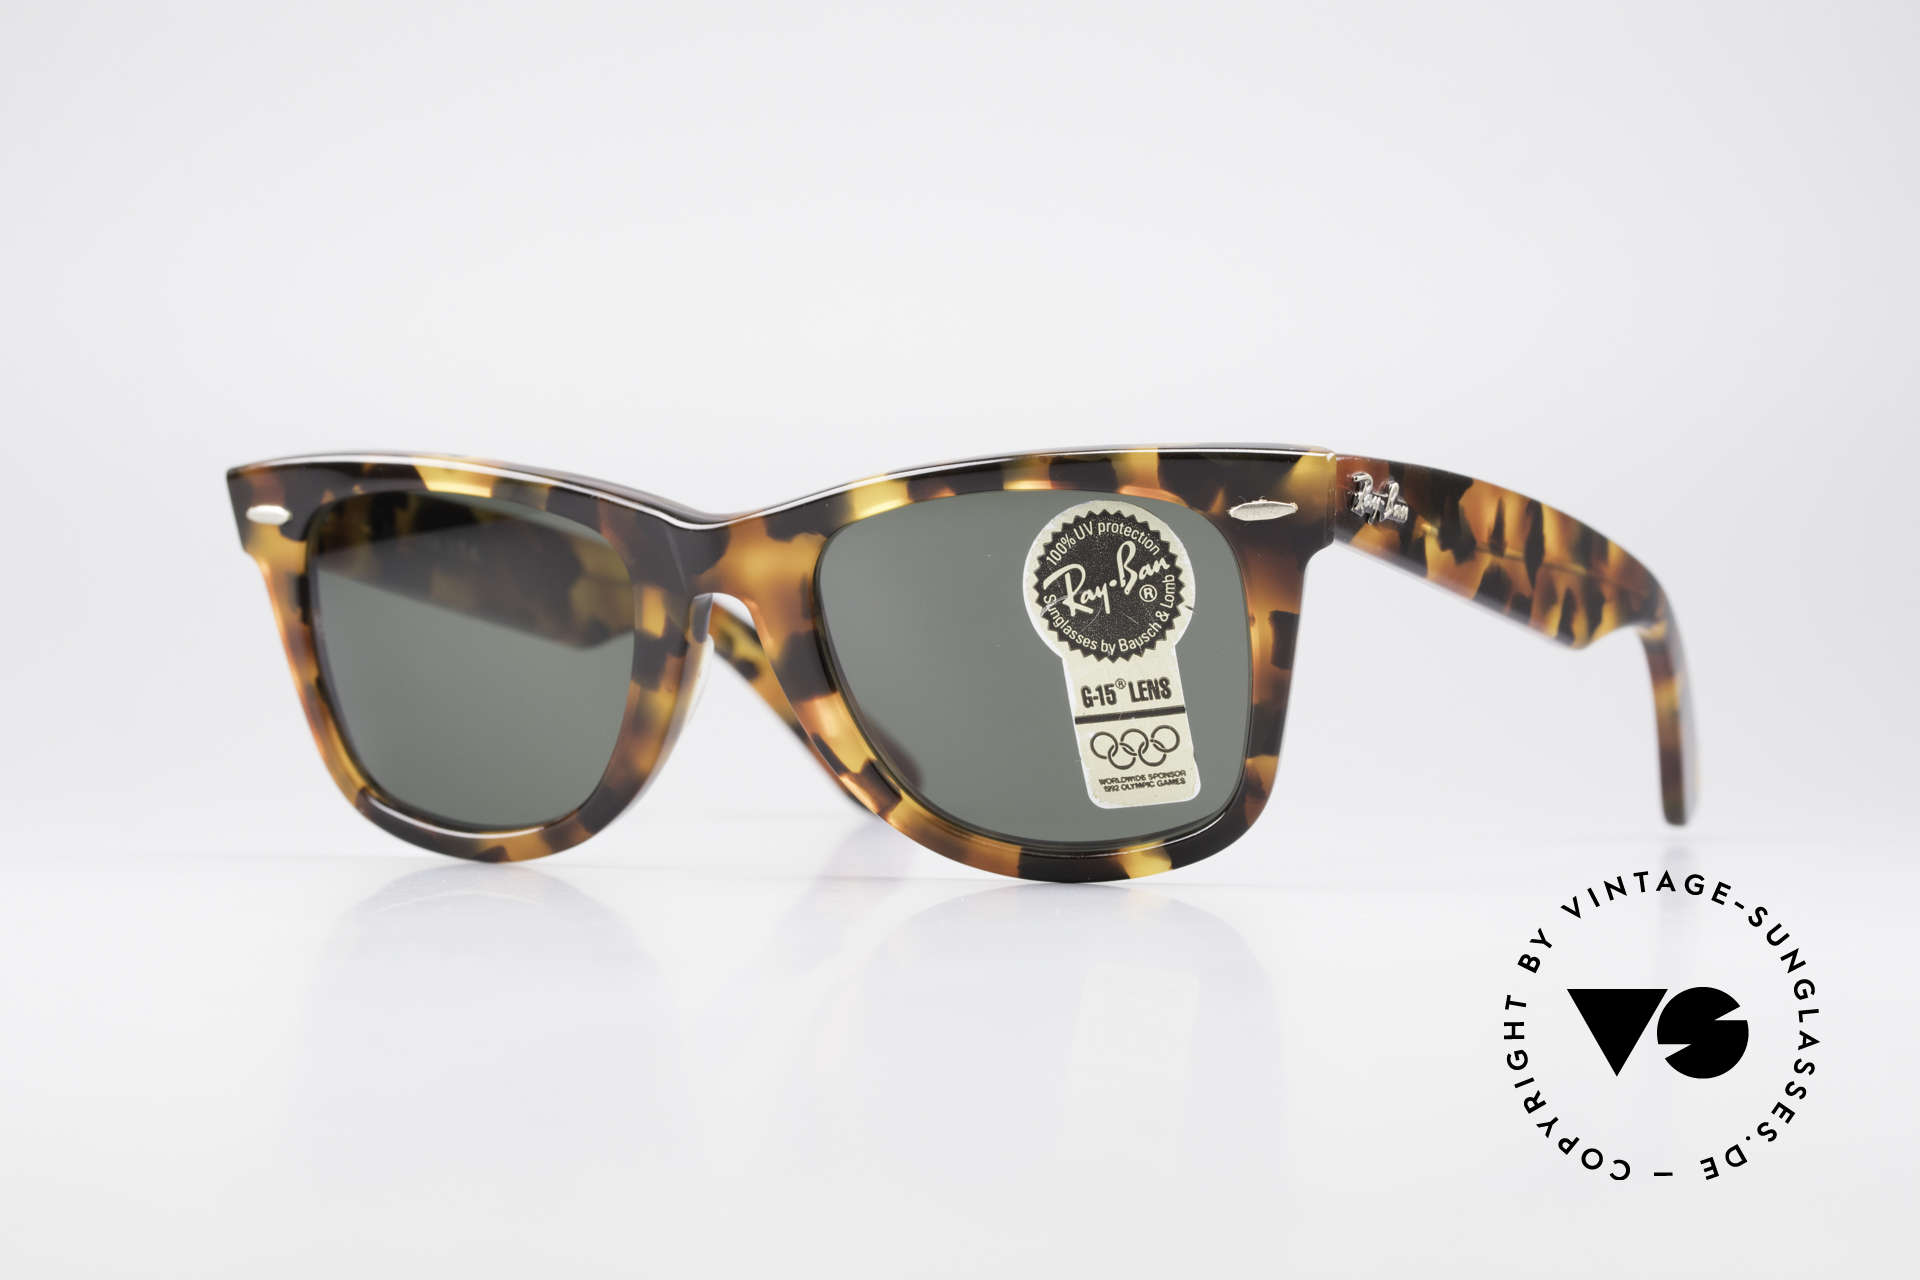 Ray Ban Limited Edition Sale, SAVE 53%.